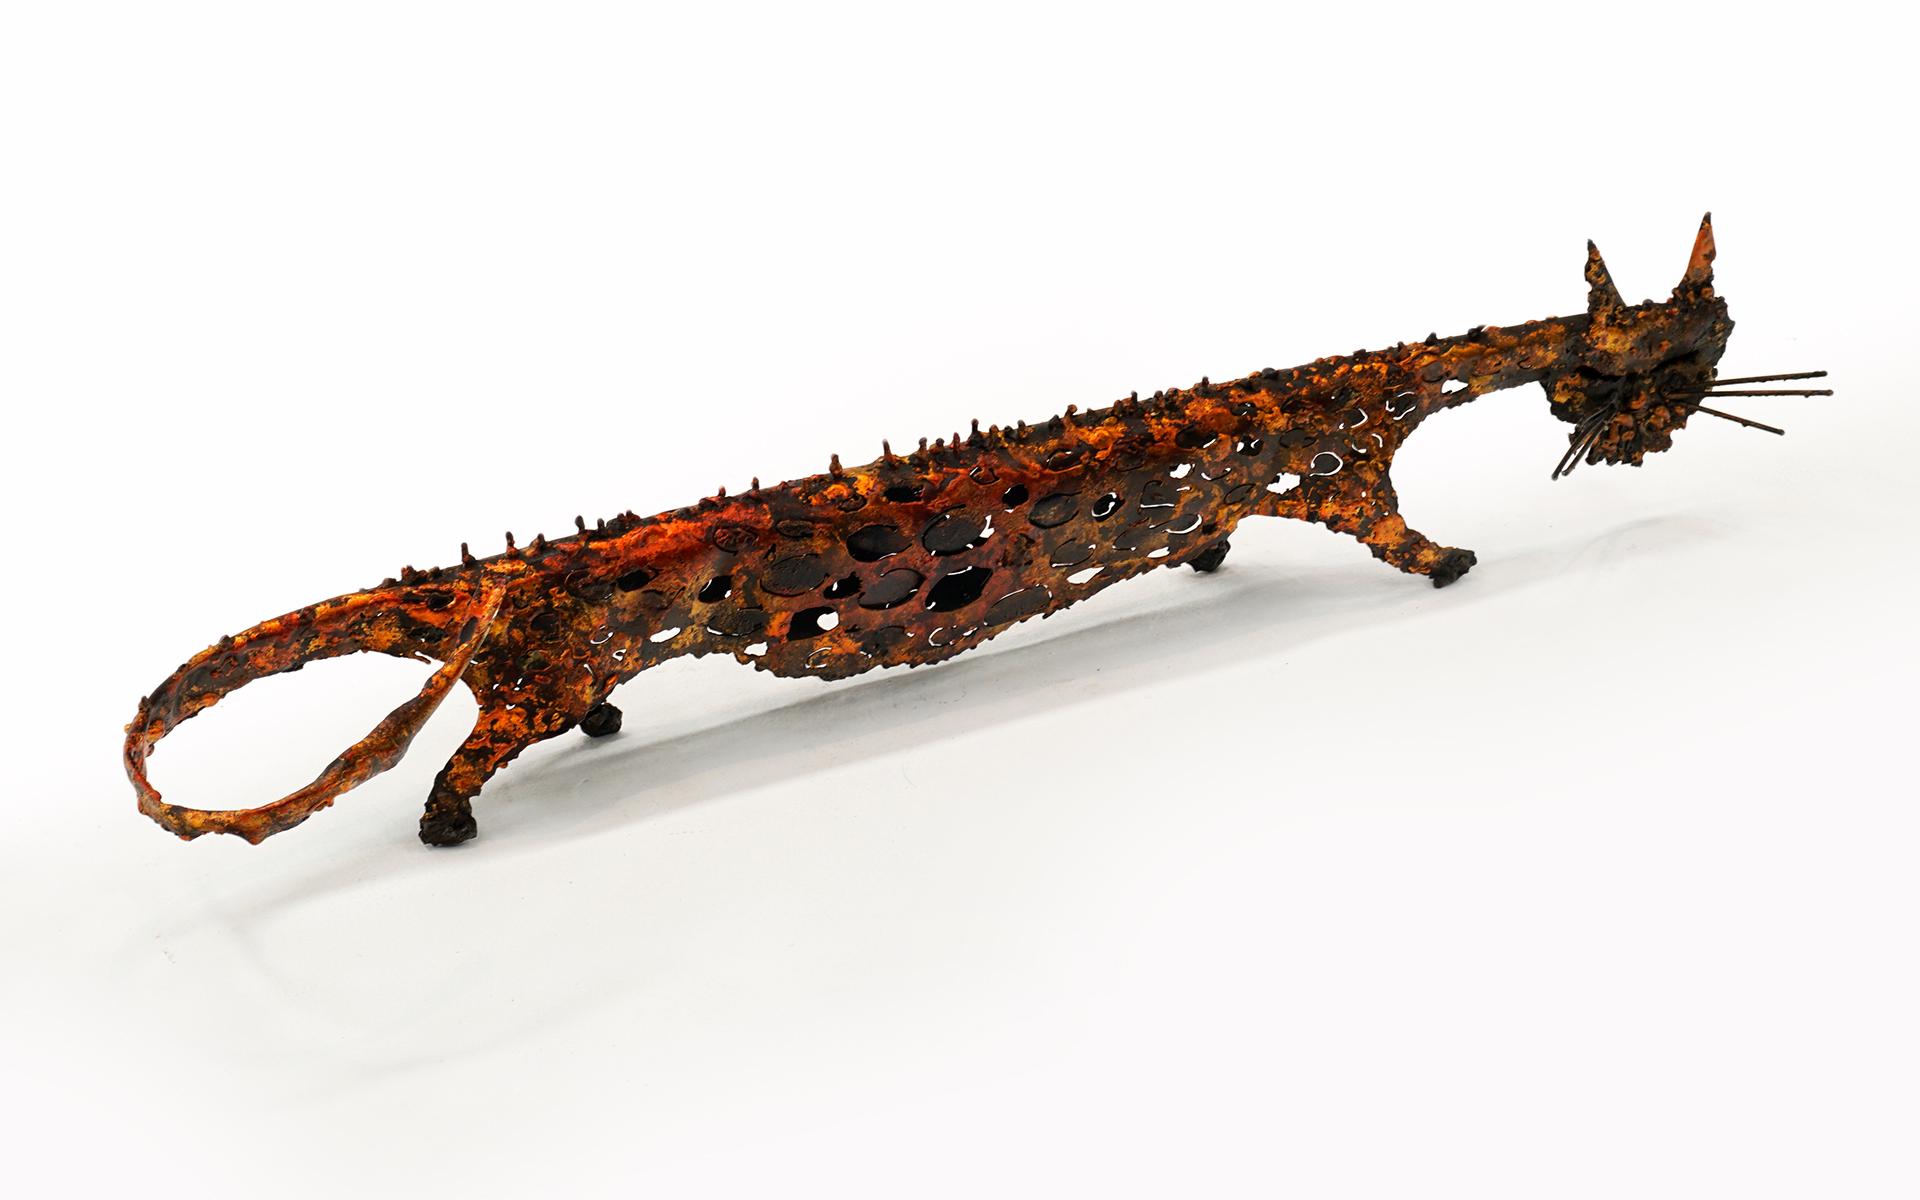 Table Top torch cut steel sculpture by James Bearden. This is the only Leopard sculpture he has done. Condition is excellent with any imperfections as intended by the artist. Acquired directly from the artist. Ready to ship.